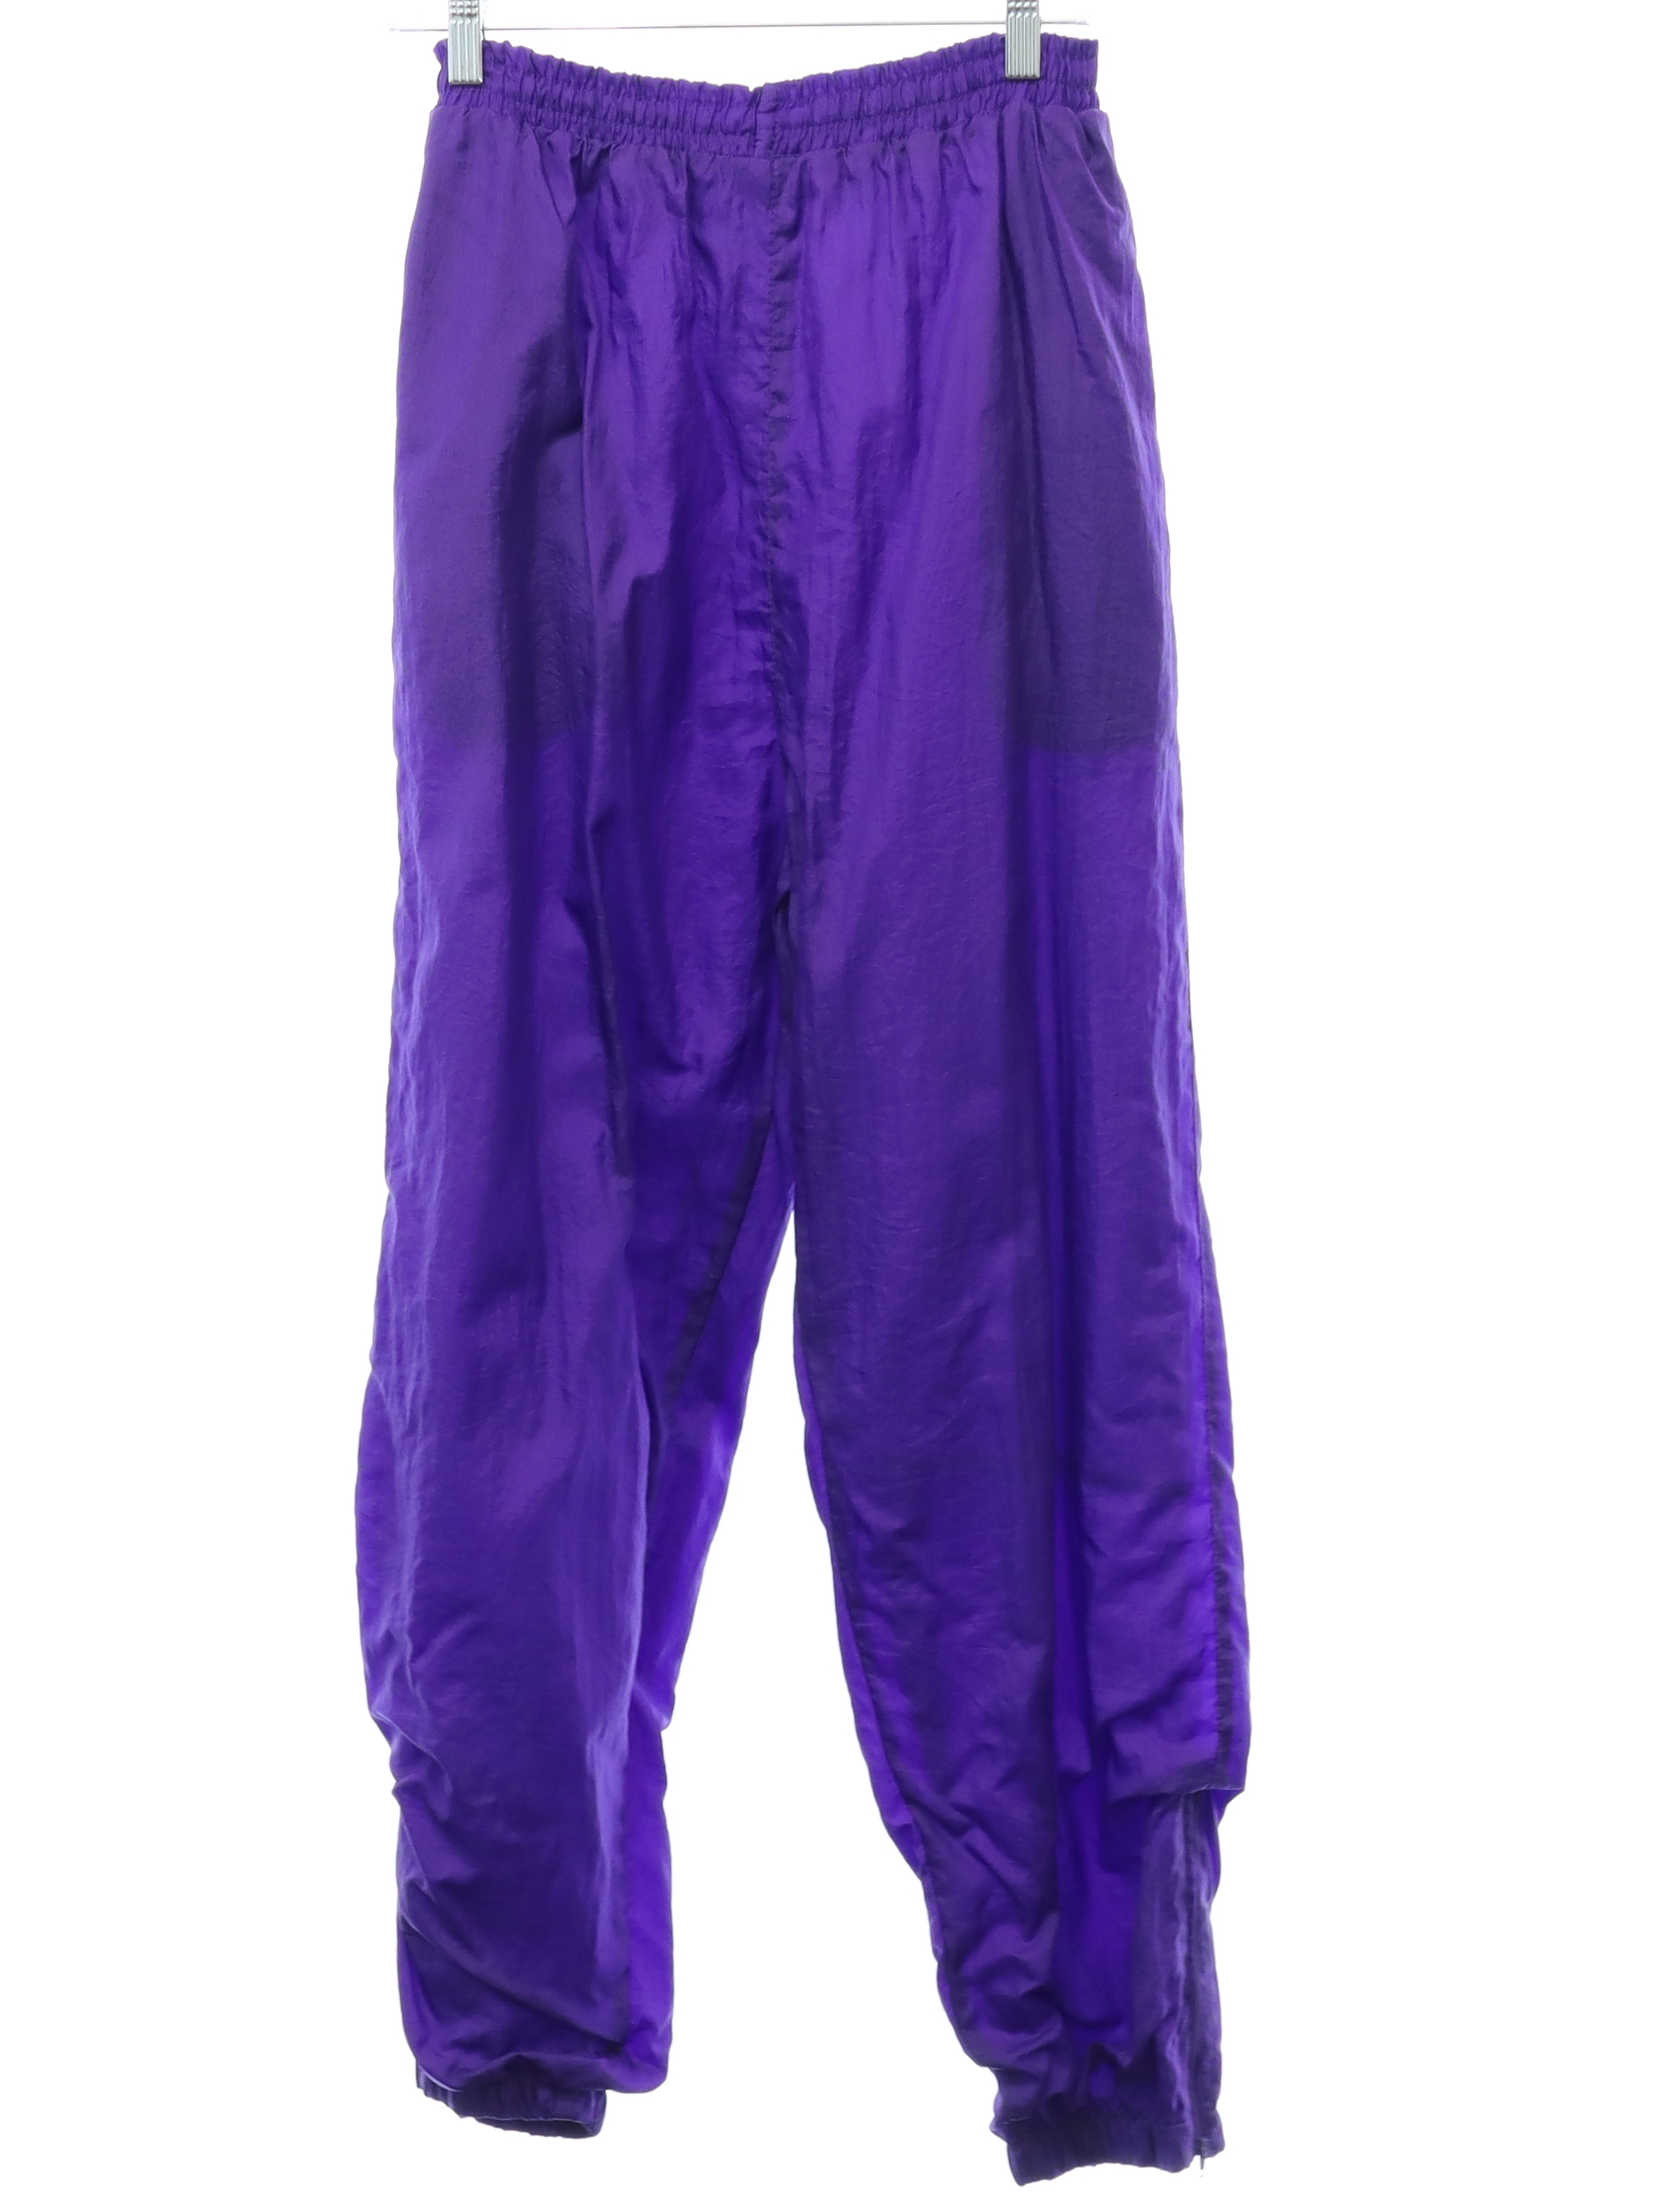 80s Pants (Basic Editions): 80s style (made in 90s) -Basic Editions- Womens  purple solid colored nylon shell flat front track or jogging pants.  Gathered elastic cuff hem with ankle zipper, vertical seam